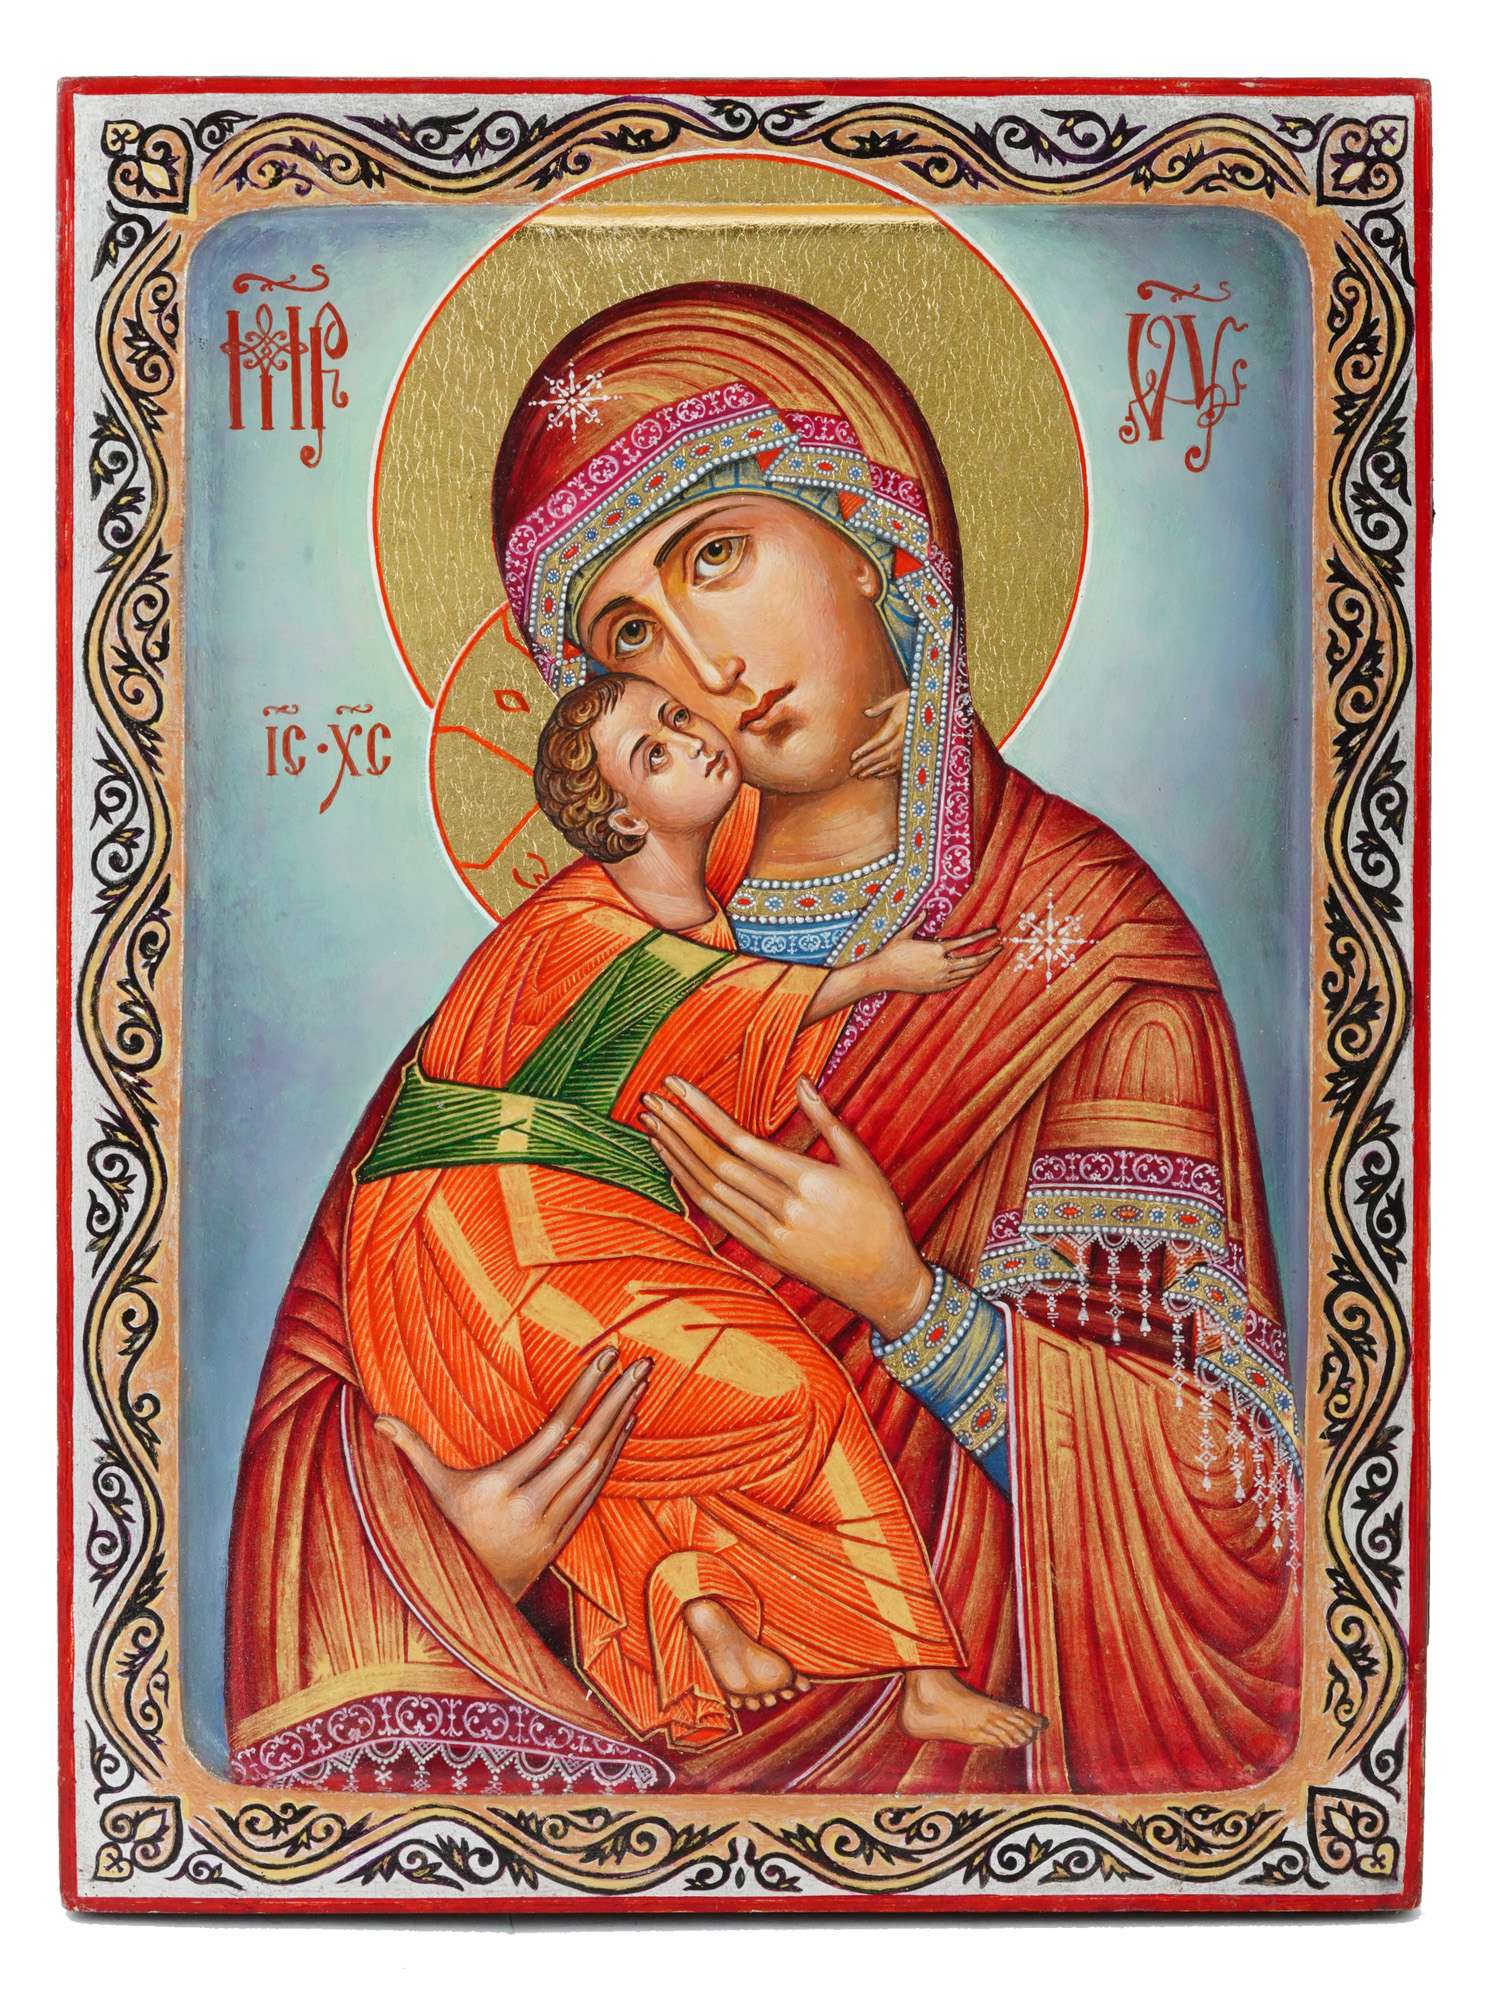 RUSSIAN VLADIMIRSKAYA MOTHER OF GOD HAND PAINTED ICON PIC-0